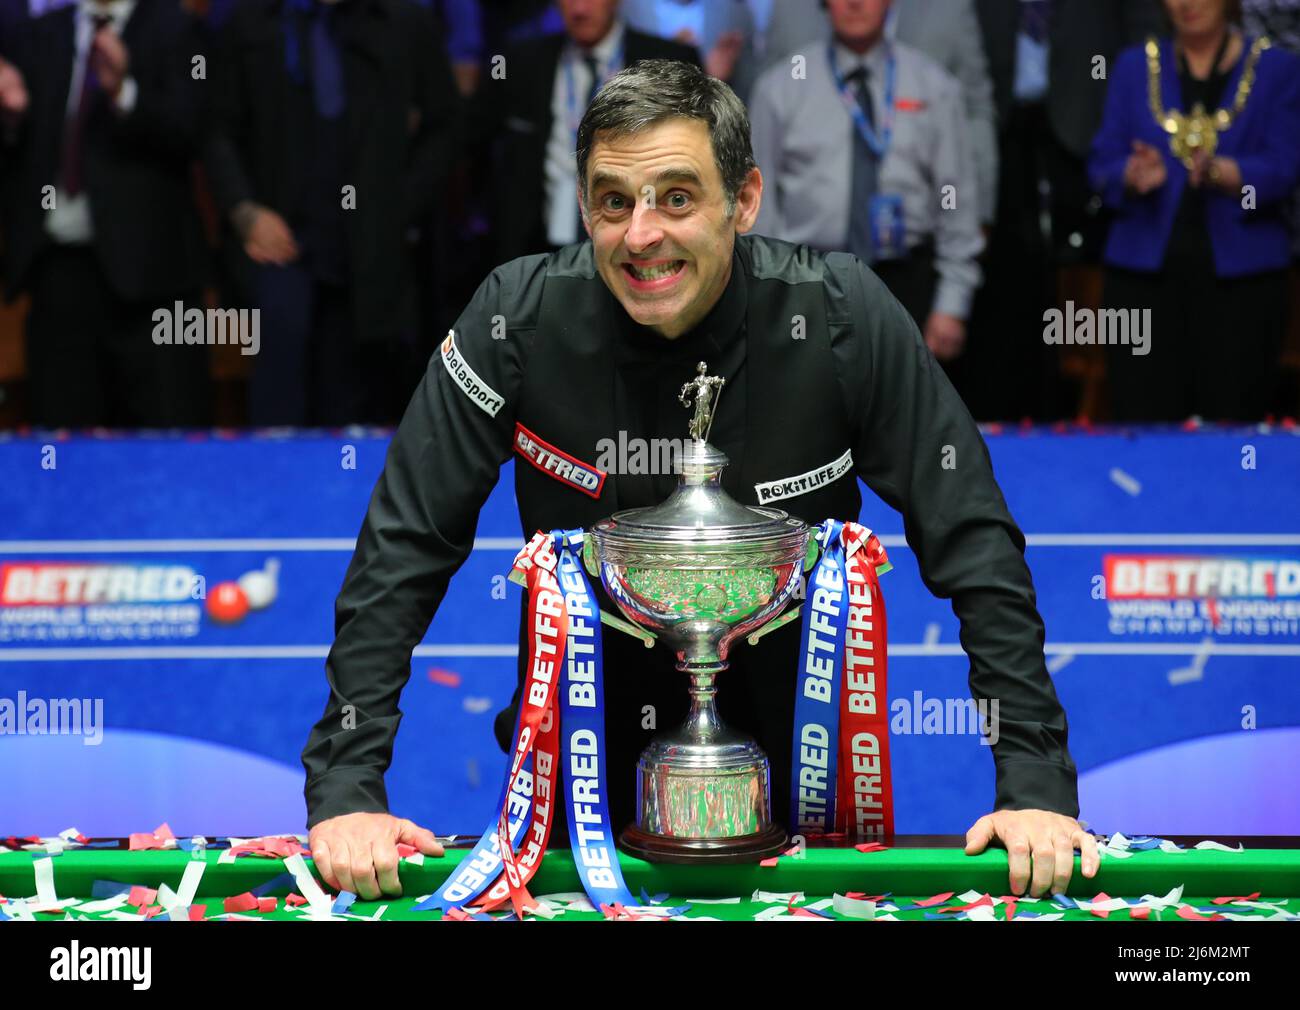 SHEFFIELD, May 3, 2022 (Xinhua) -- Englands Ronnie OSullivan celebrates with the trophy during the awarding ceremony after the final over Englands Judd Trump at the Betfred World Snooker Championship in Sheffield,